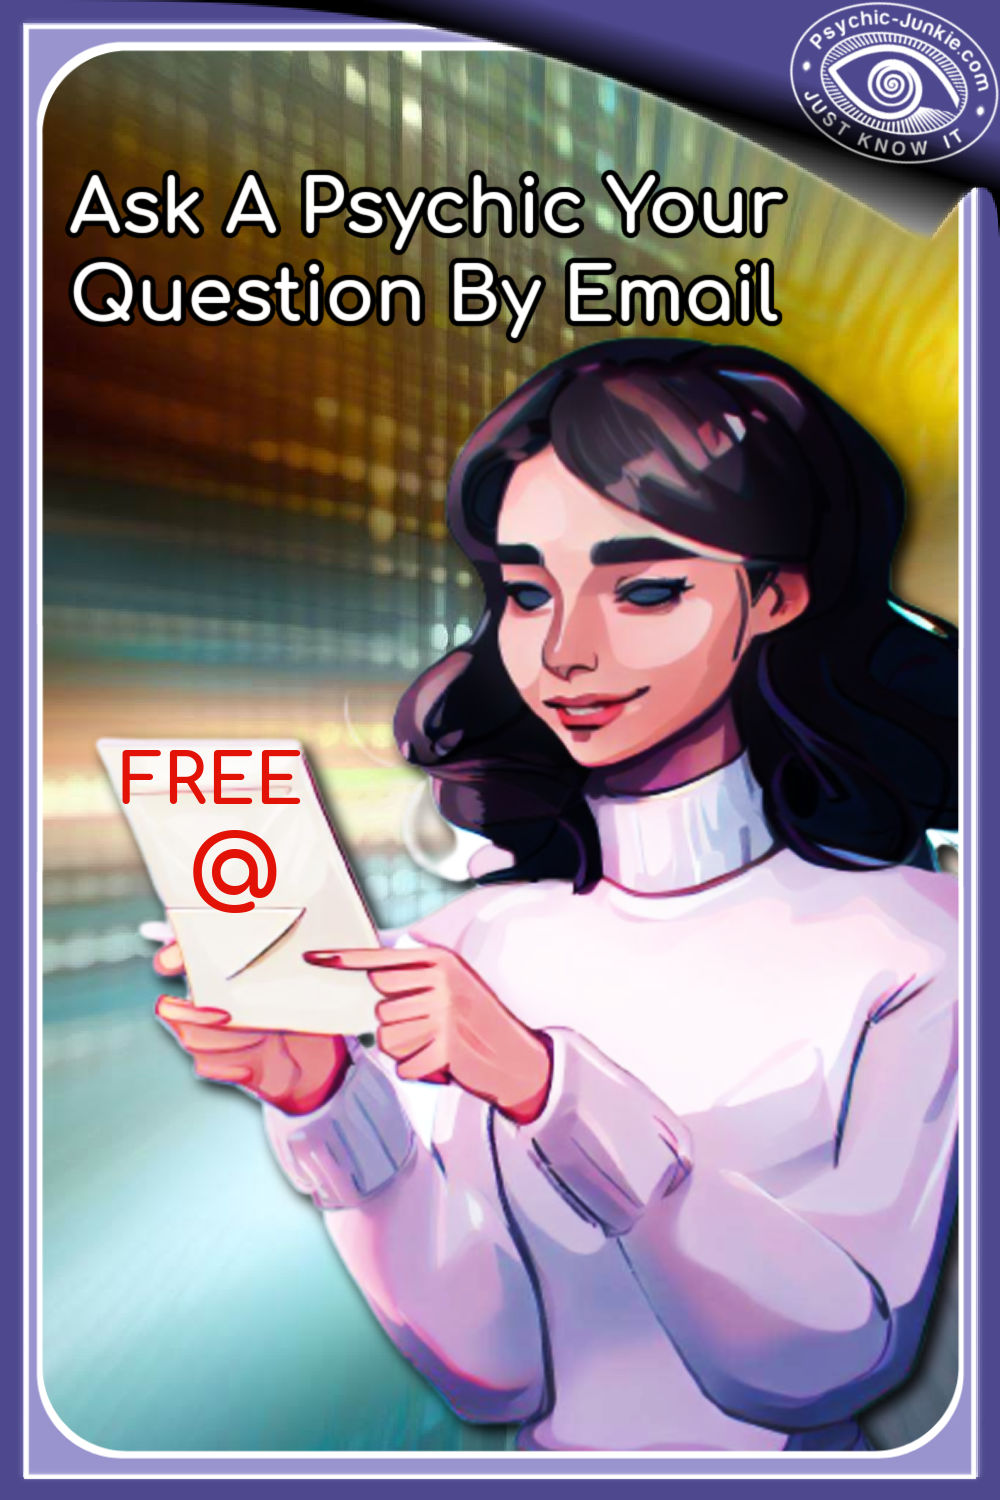 Get A Free Psychic Question Through Email